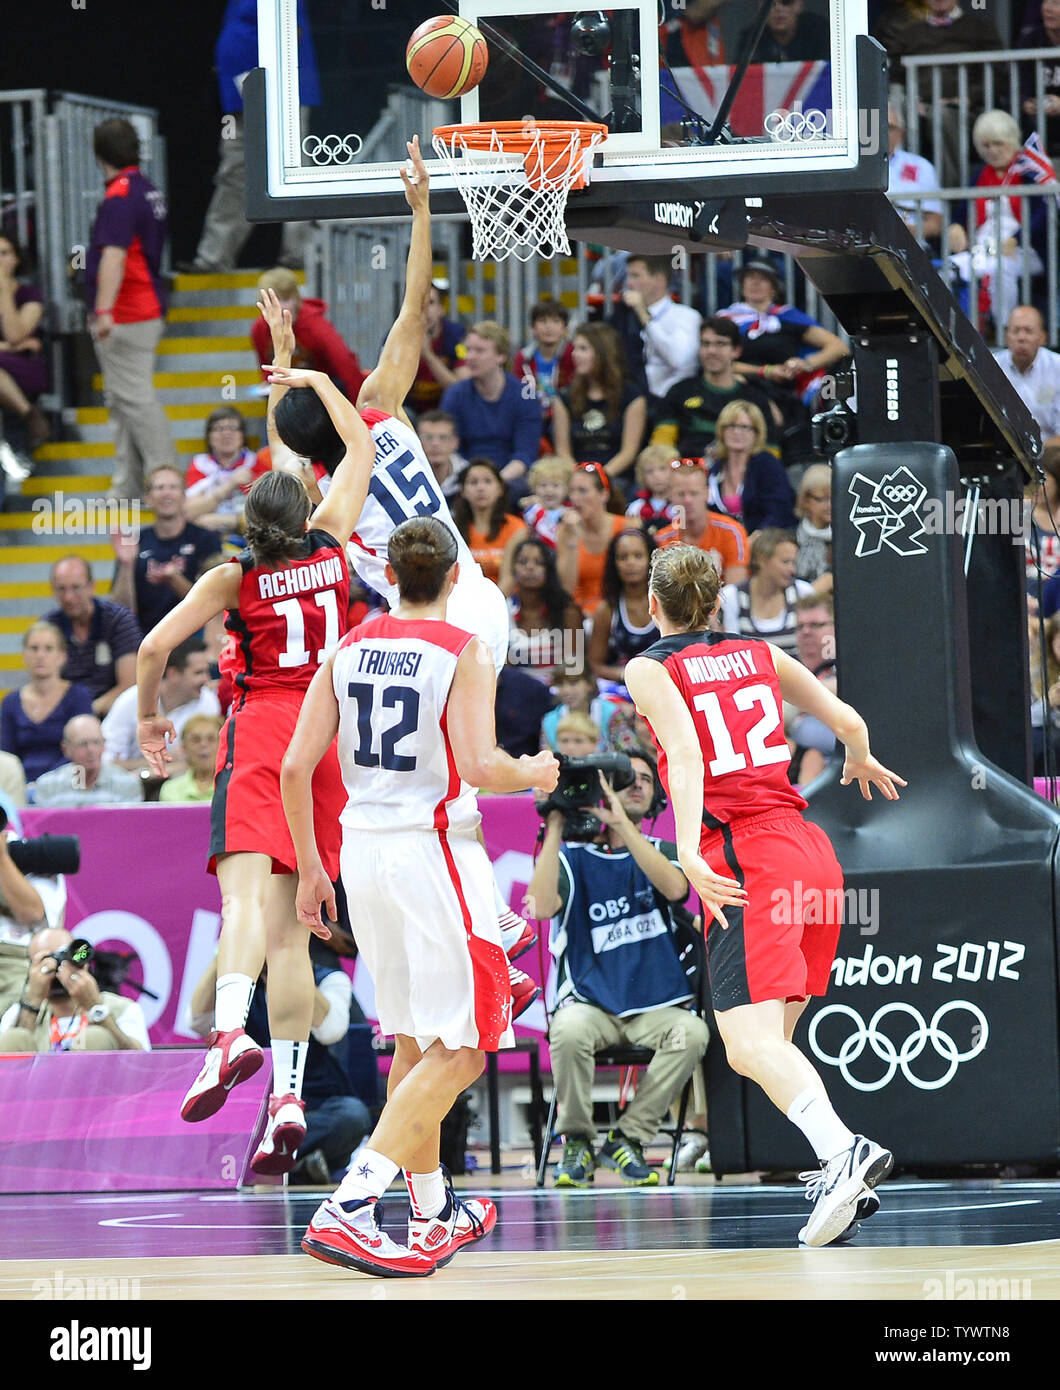 Candace Parker (15) of the United States scores a first quarter basket against Canada in the Women's Basketball quarterfinal at the London 2012 Summer Olympics on August 7, 2012 in London.   UPI/Ron Sachs Stock Photo